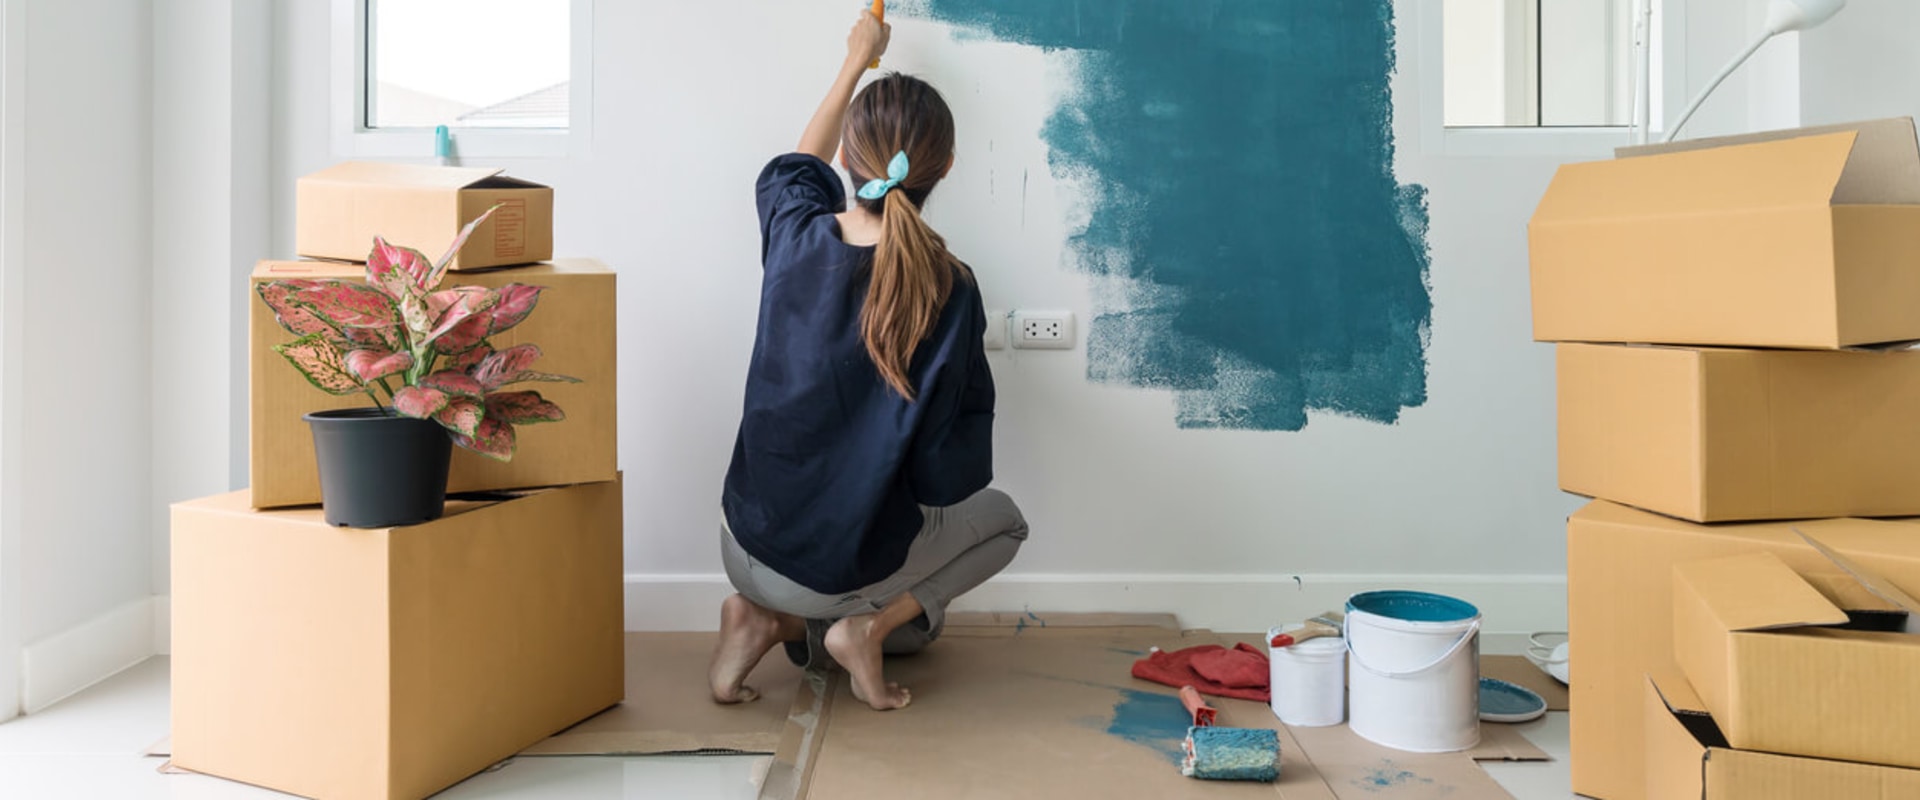 What gets rid of paint fumes fast?